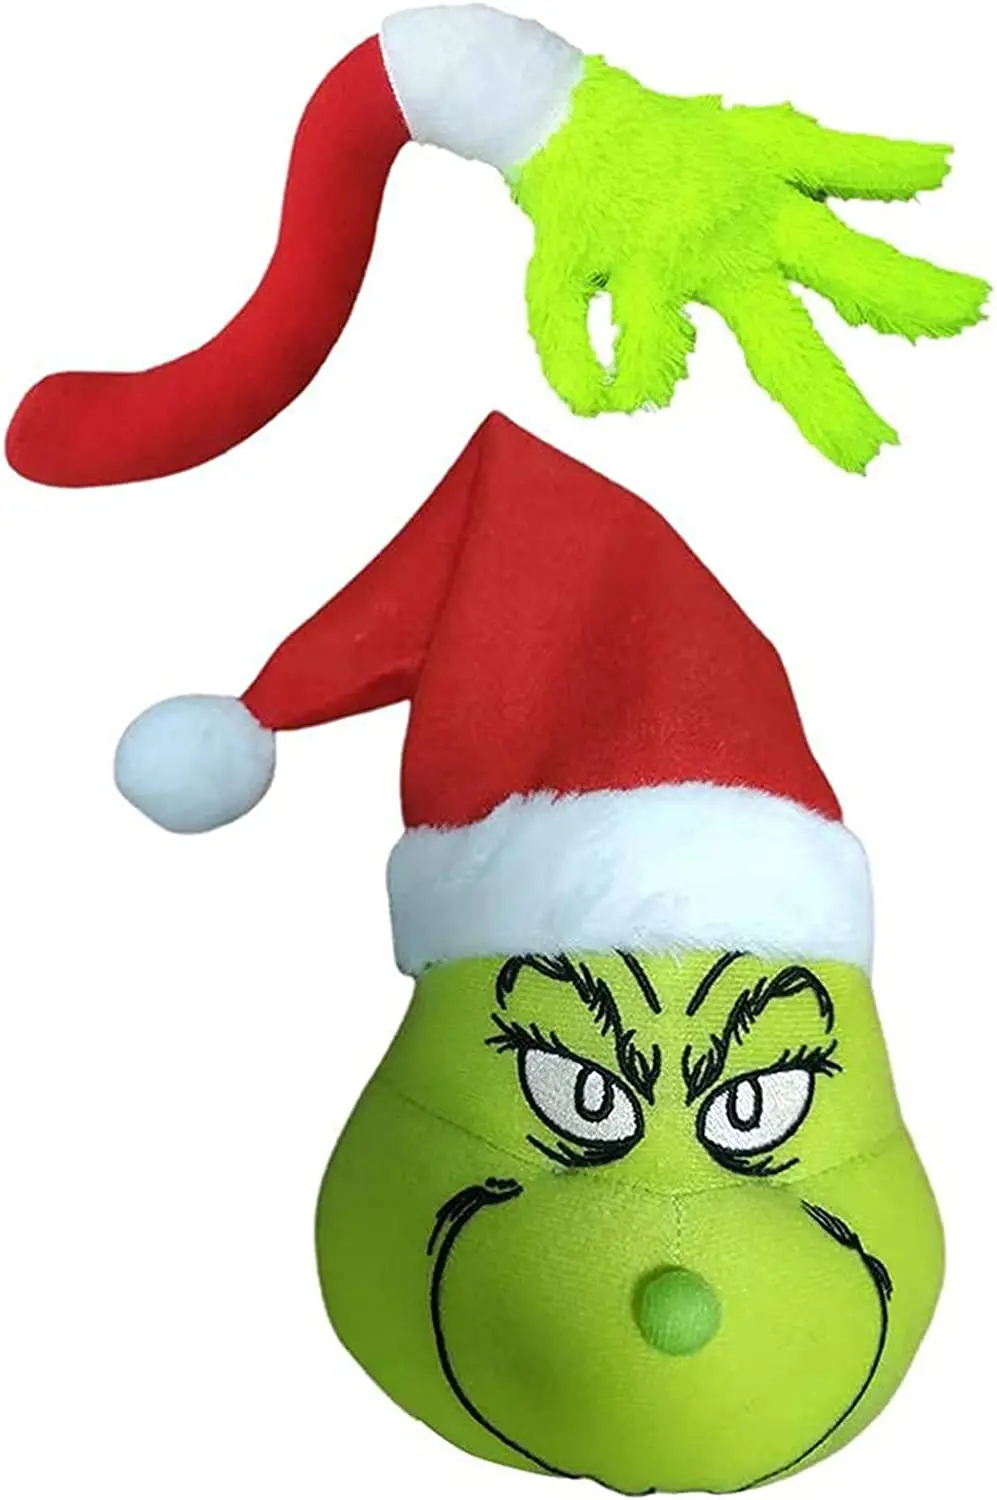 Christmas Tree Decorations, Plush Doll Grinch Hand Ornament , Elf Body Decor, for Christmas Tree Holiday Party